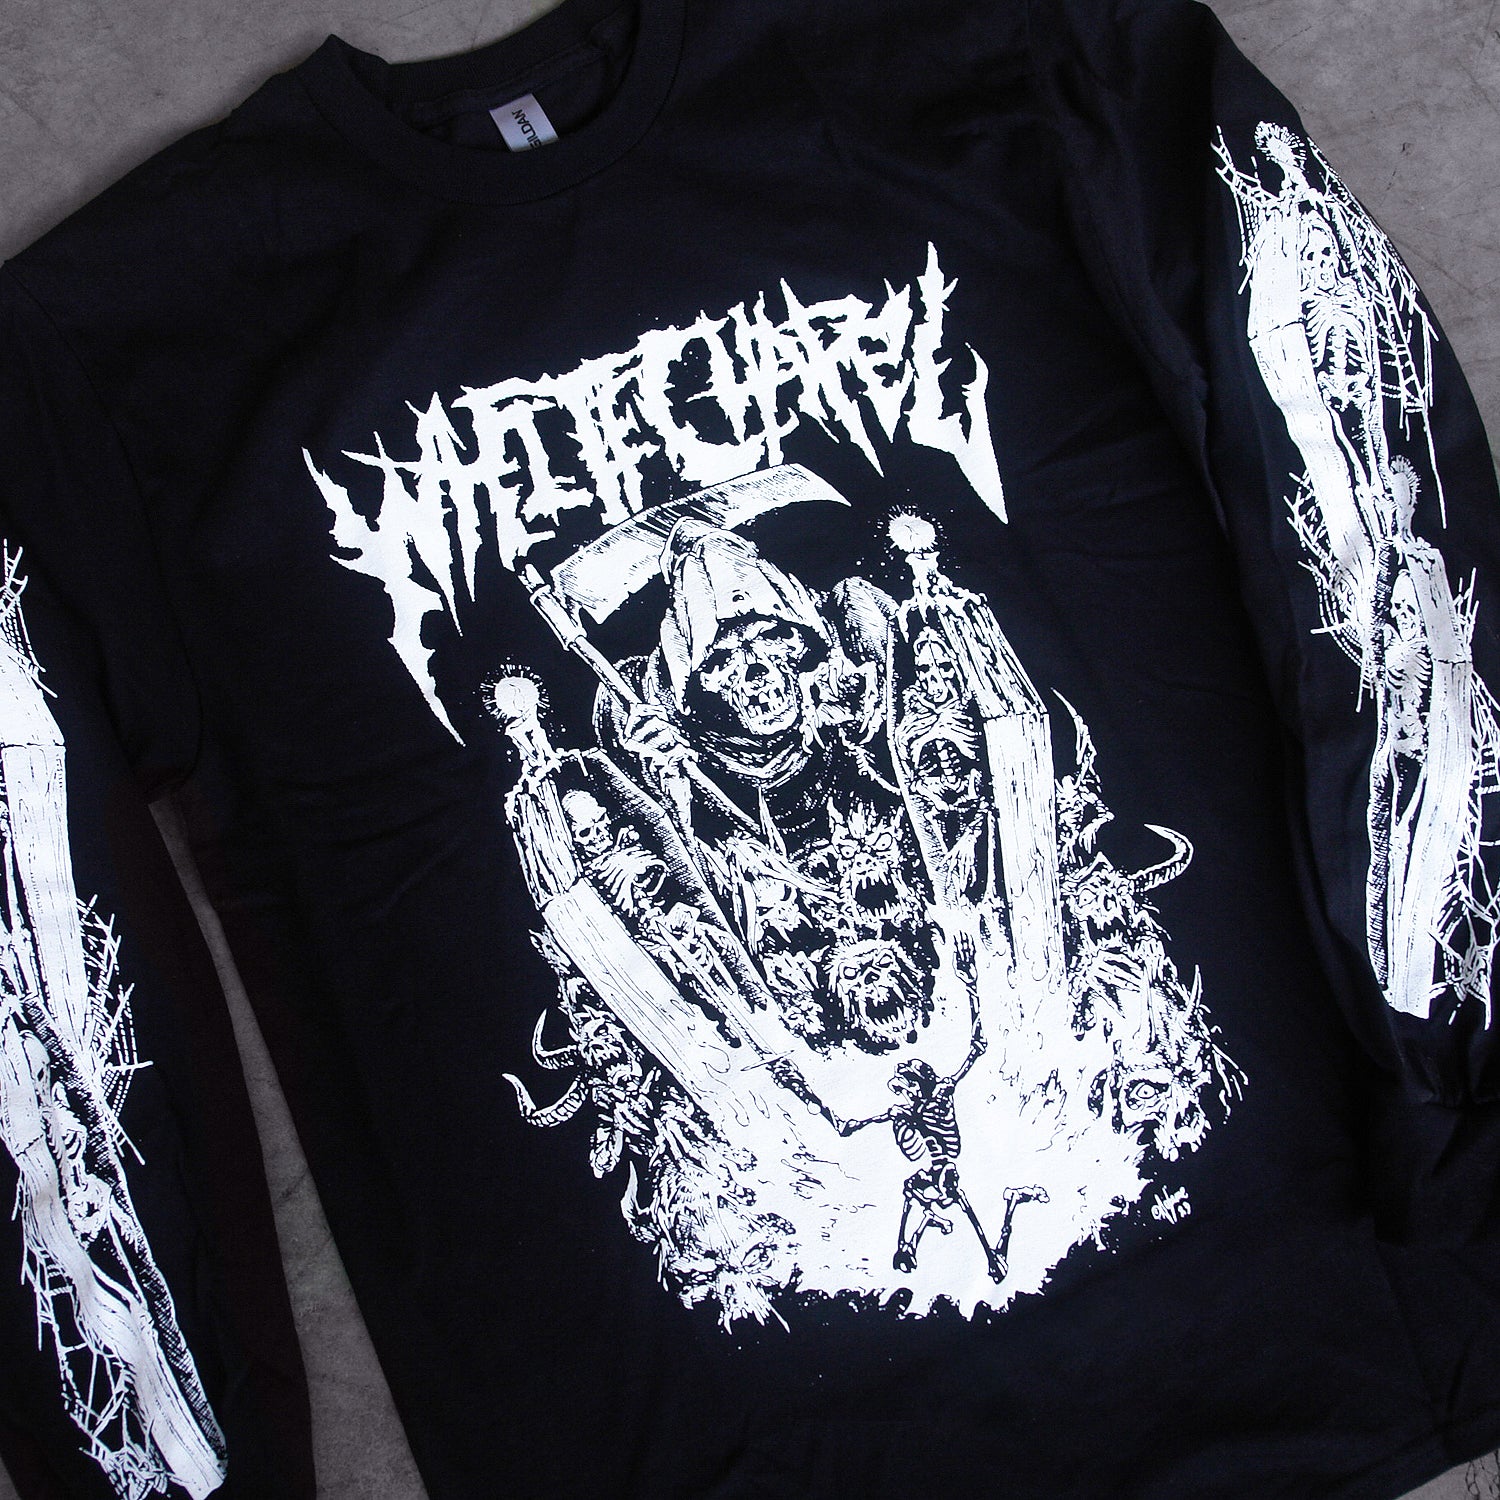 close up image of a black long sleeve tee shirt laid on a concrete floor. front has full body print in white of a grim reaper looking over a skeleton. at the top says whitechapel. each sleeve has prints of skeletons in coffins